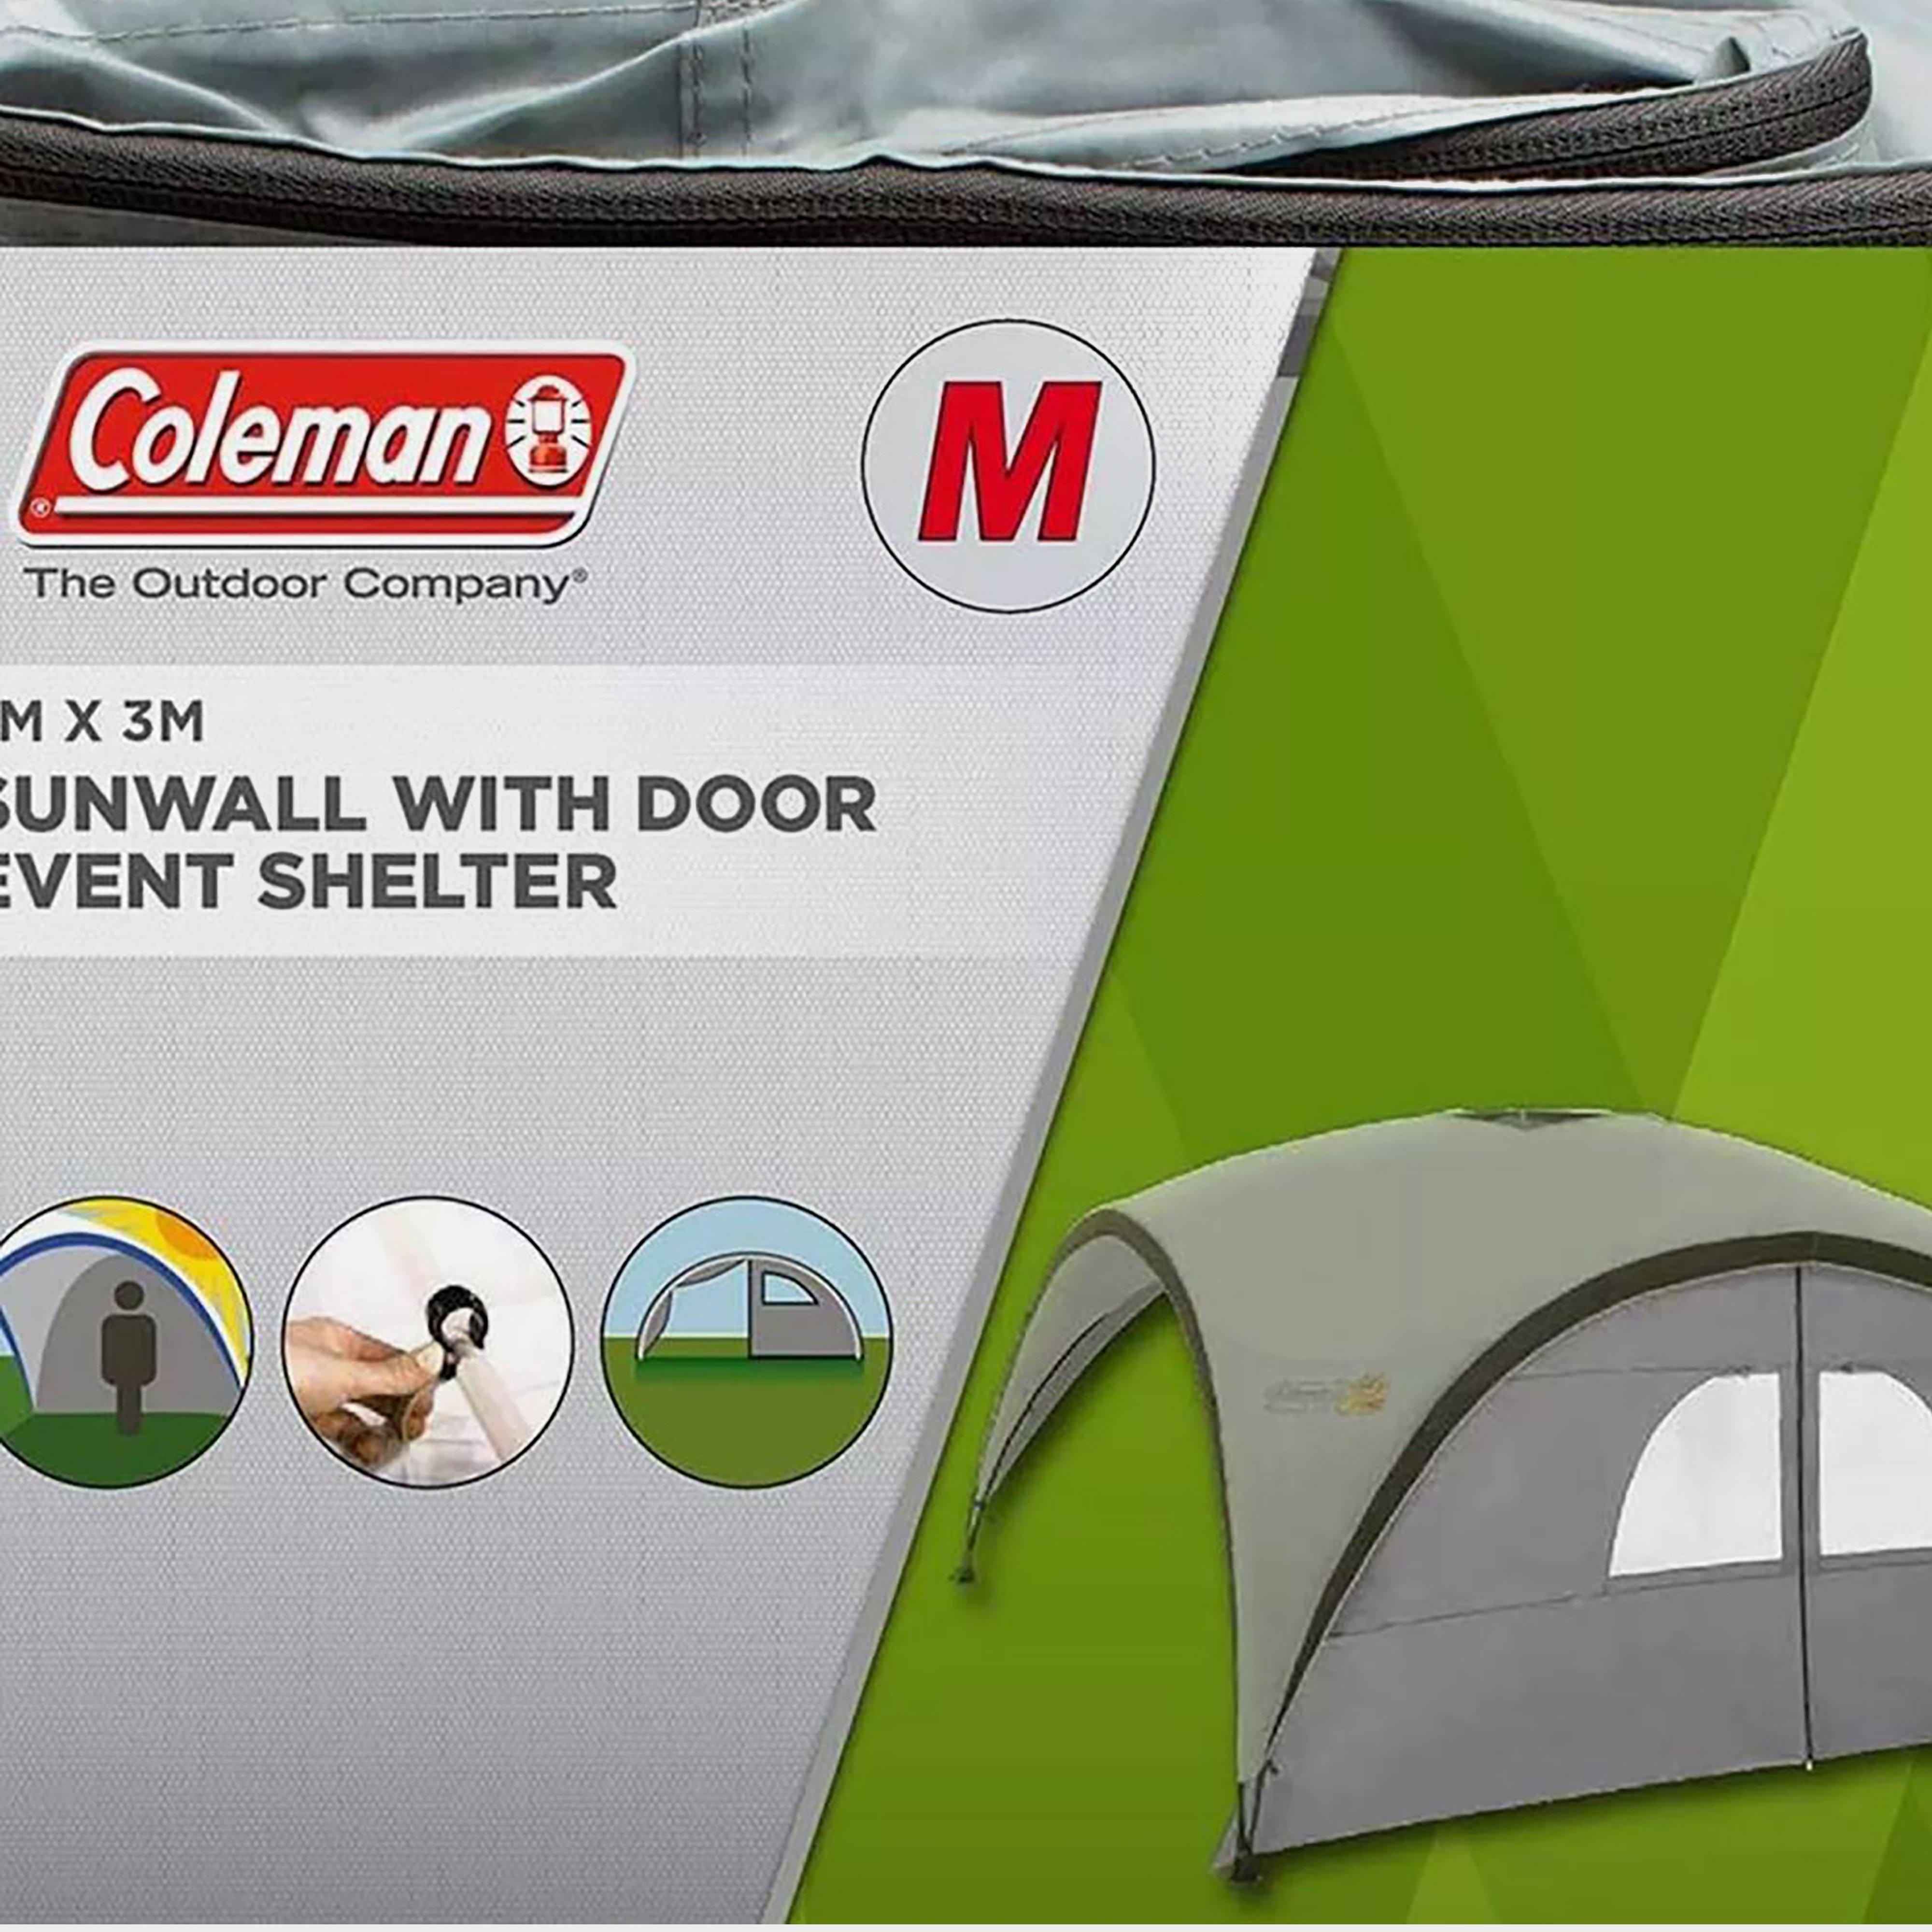 Coleman Coleman Fastpitch Event Shelter Pro L Sunwall With Door - White, WHITE